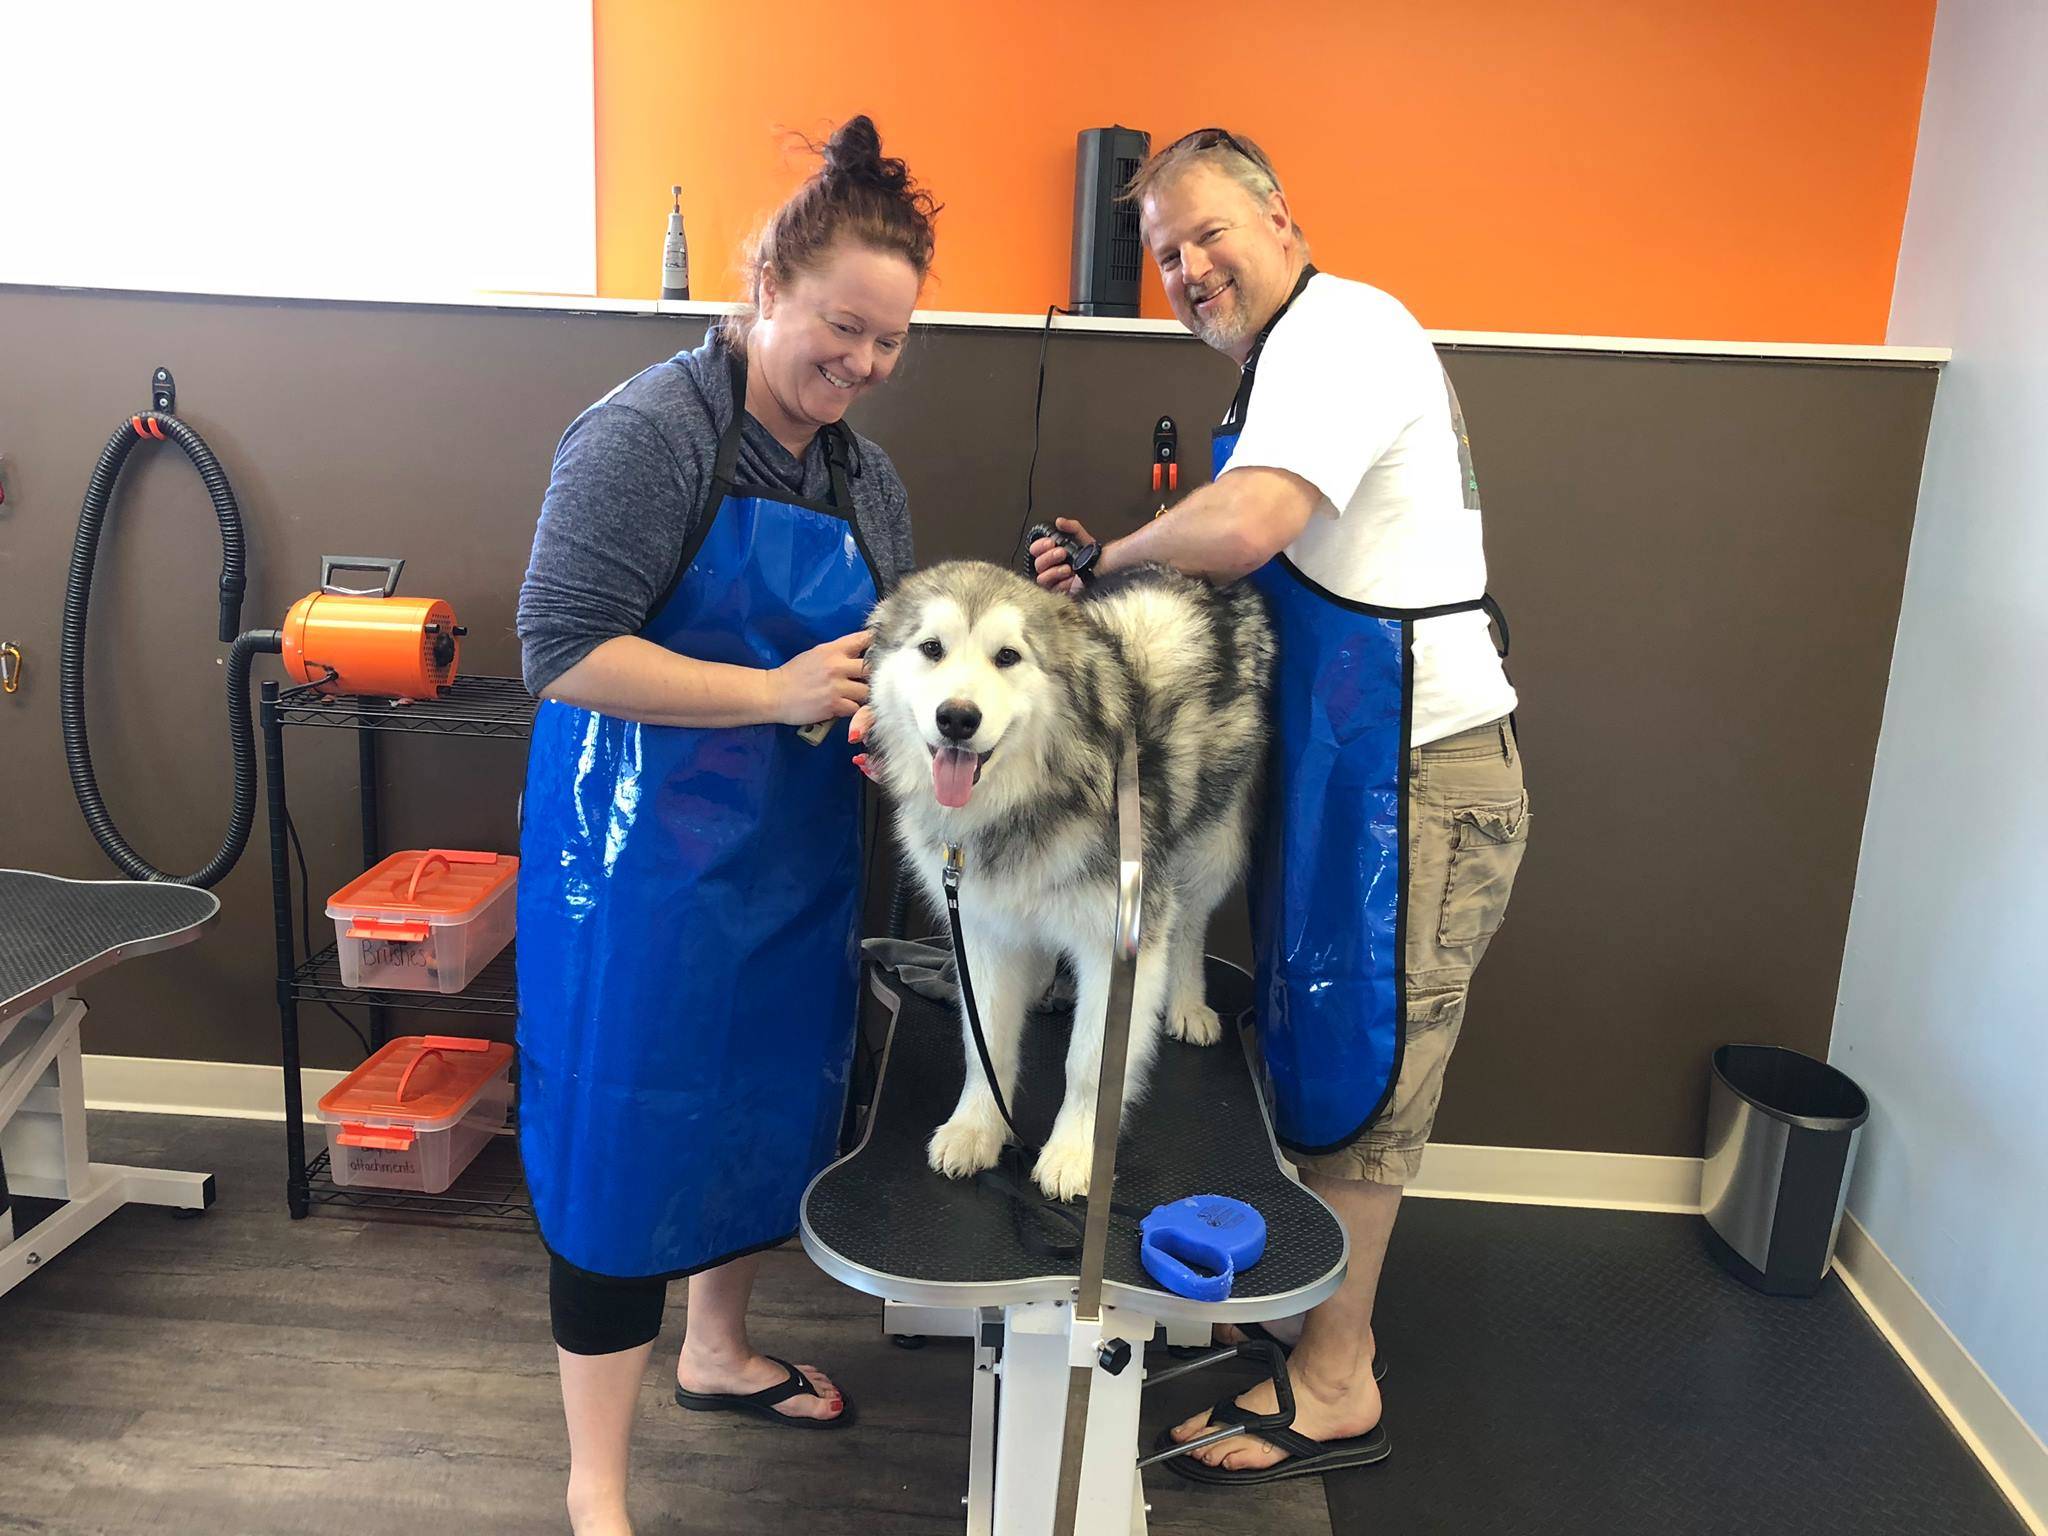 Customers use Muddy Mutts self-service operations to clean their dog. (Photo courtesy of Nick Sorrell)